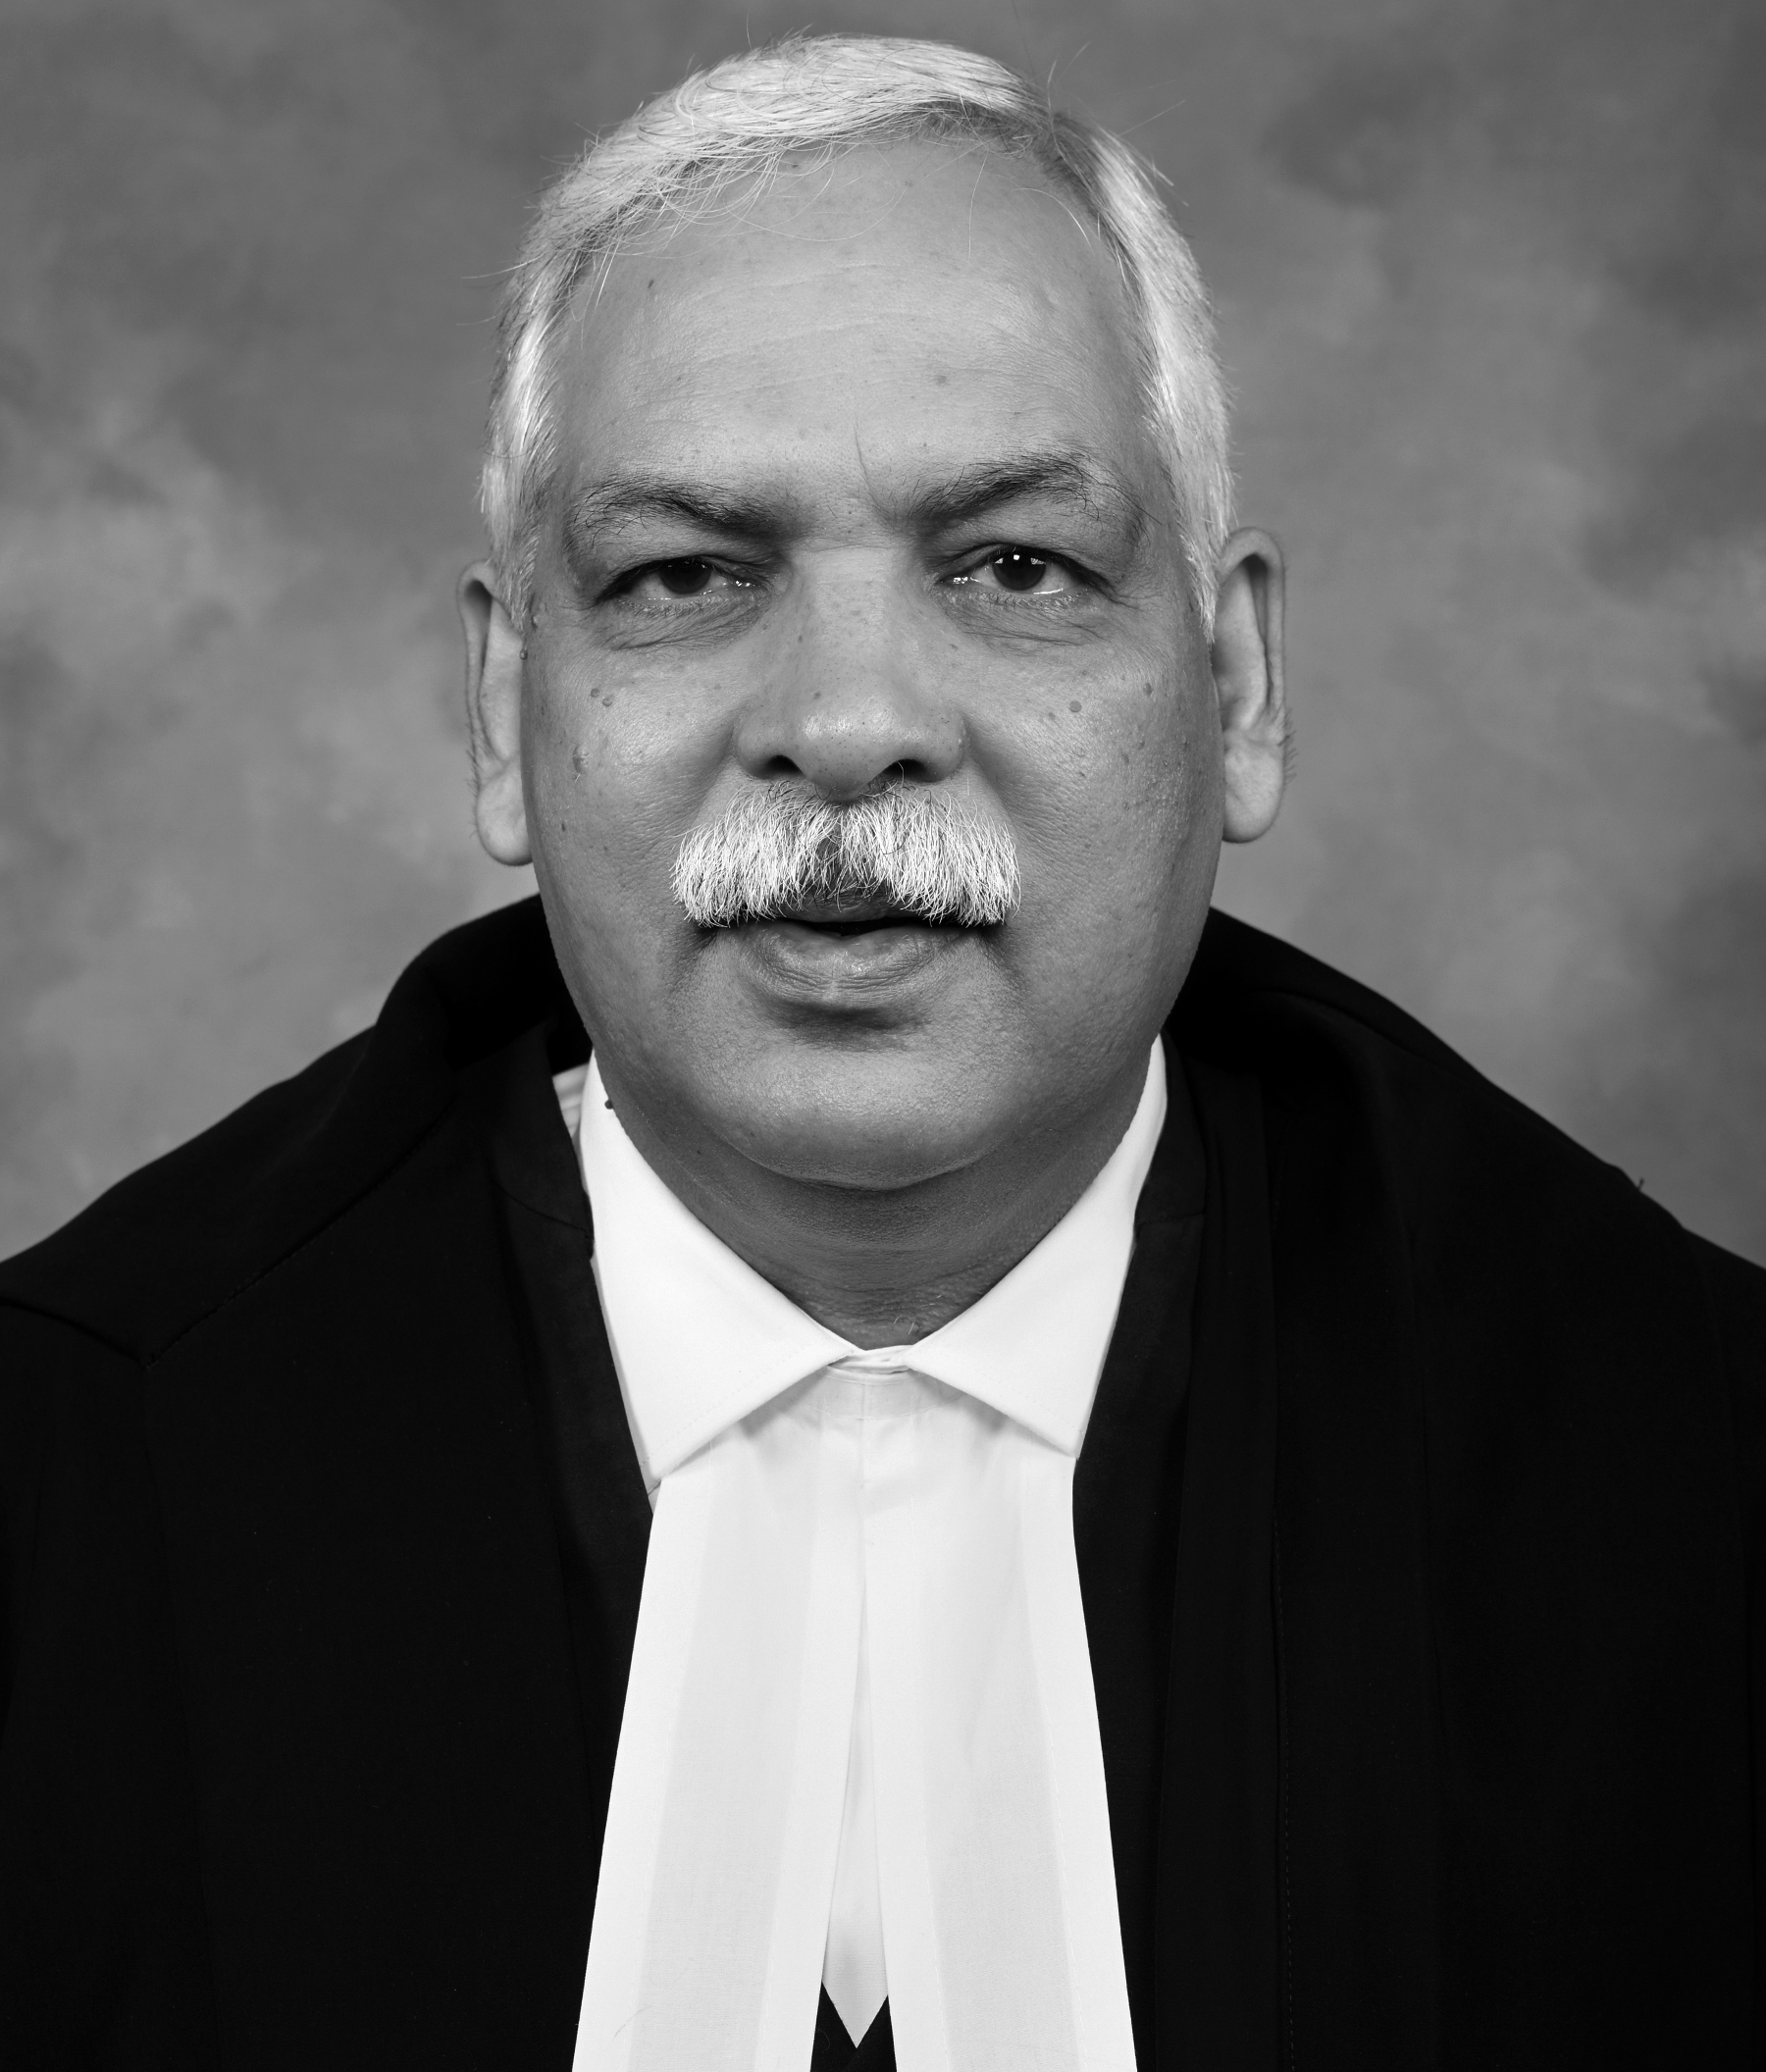 THE CHIEF JUSTICE